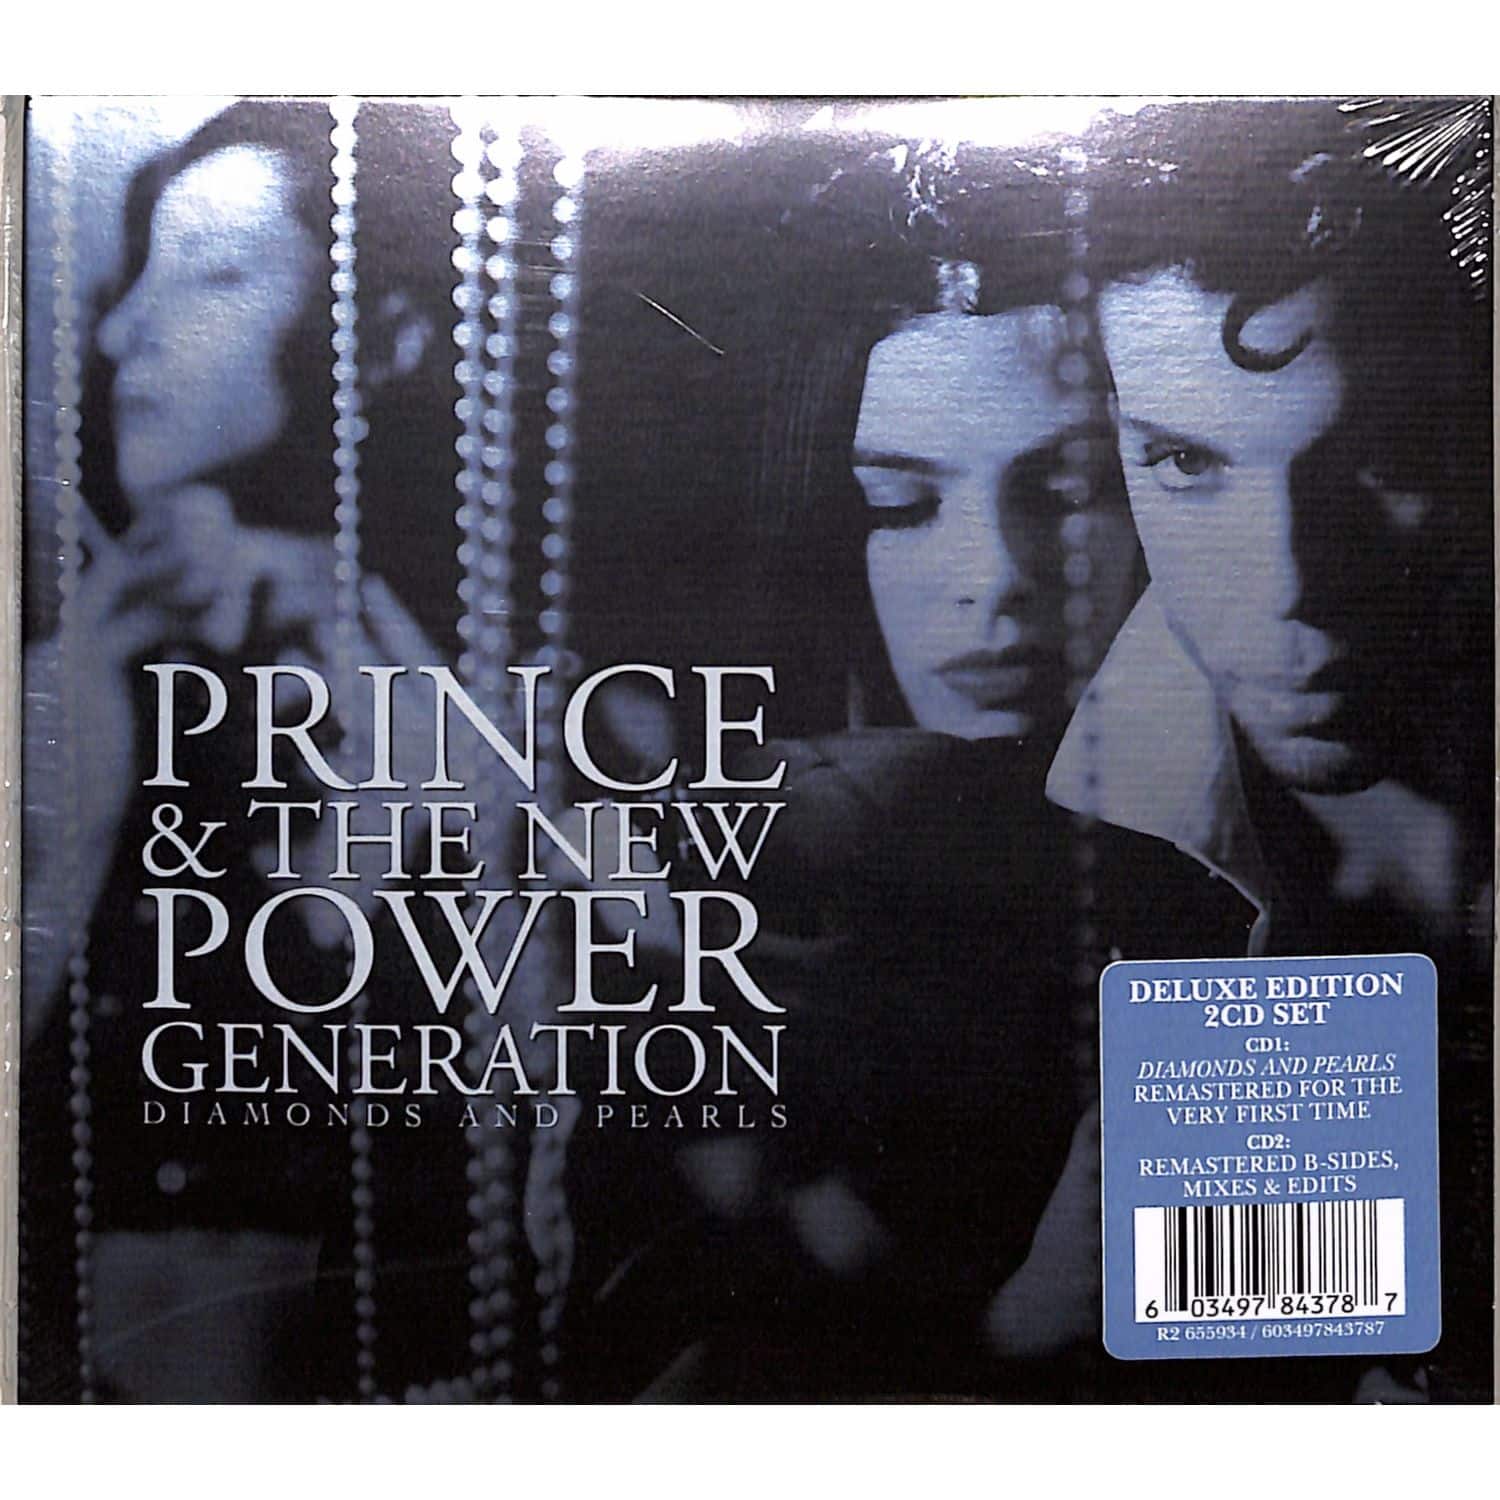 Prince & The New Power Generation - DIAMONDS AND PEARLS